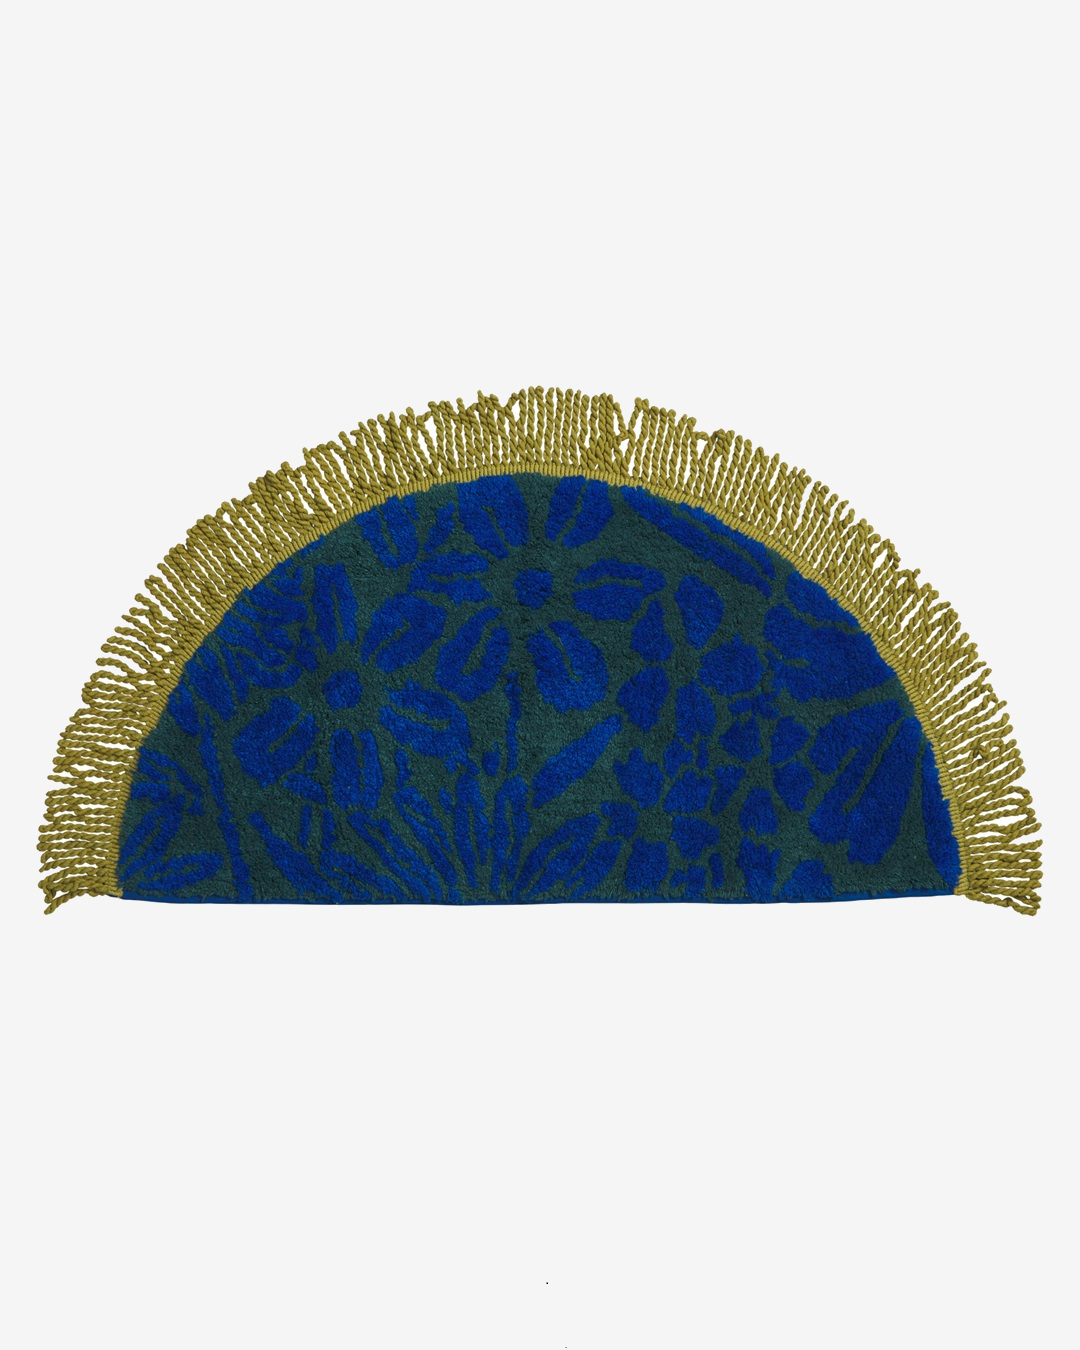 Blue and gold bath mat with fringe